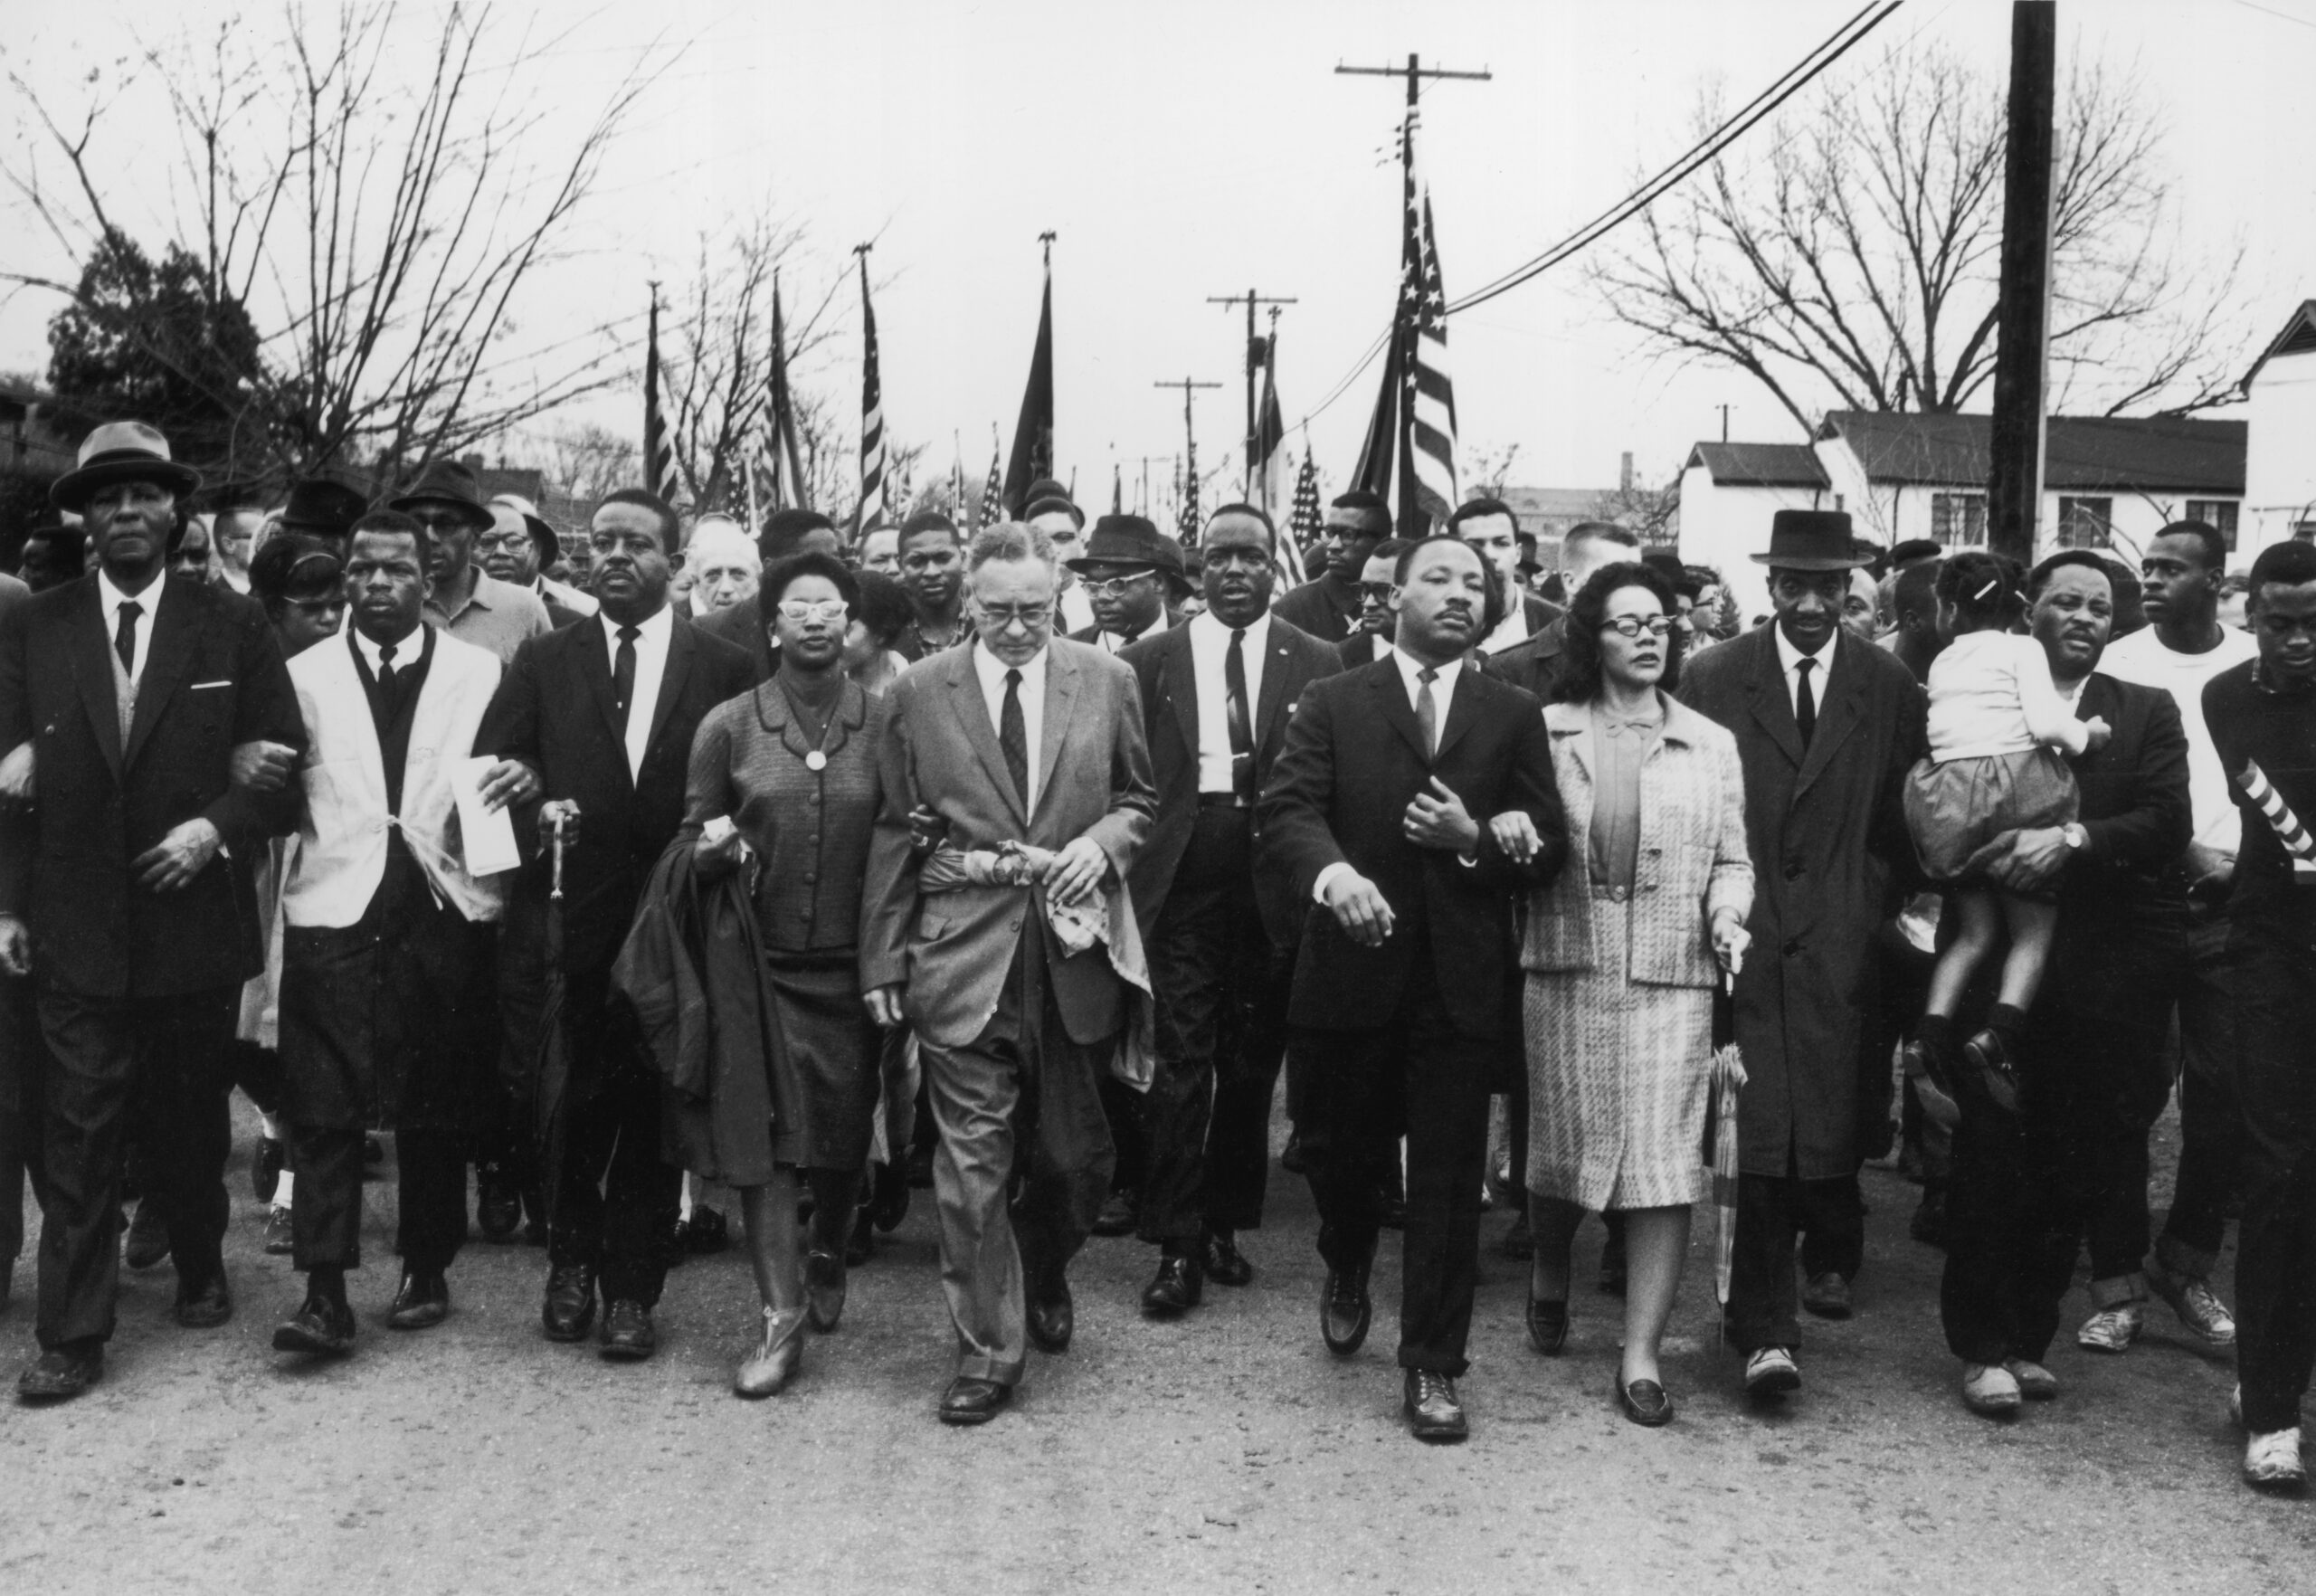 On MLK Day, The King Family Will March For Voting Rights